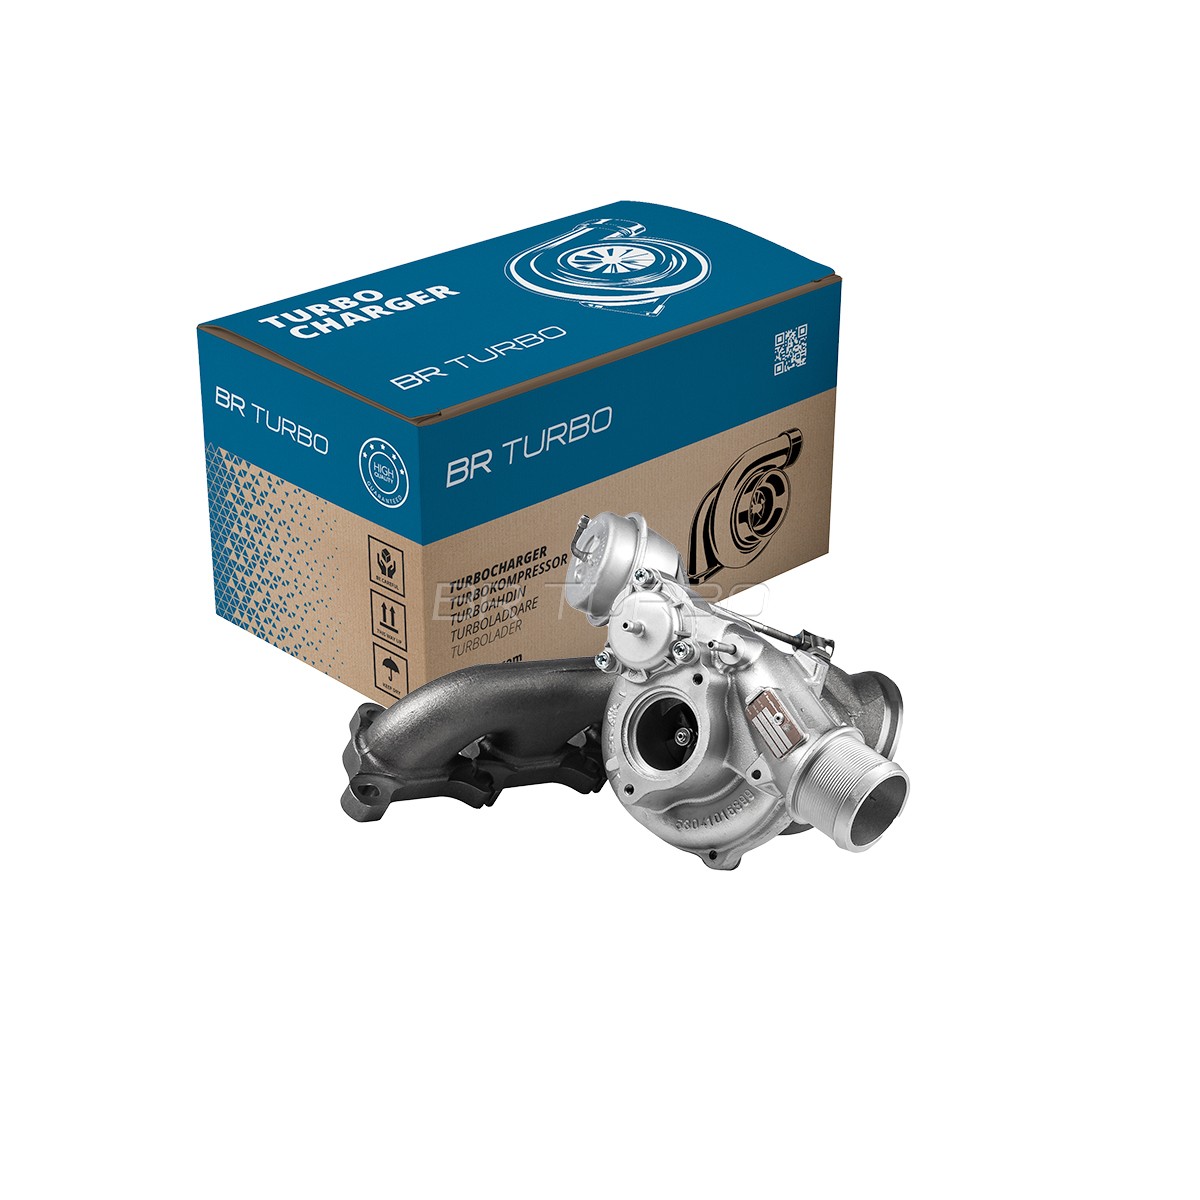 Opel CORSA Turbocharger 16875440 BR Turbo 53039980110RS online buy